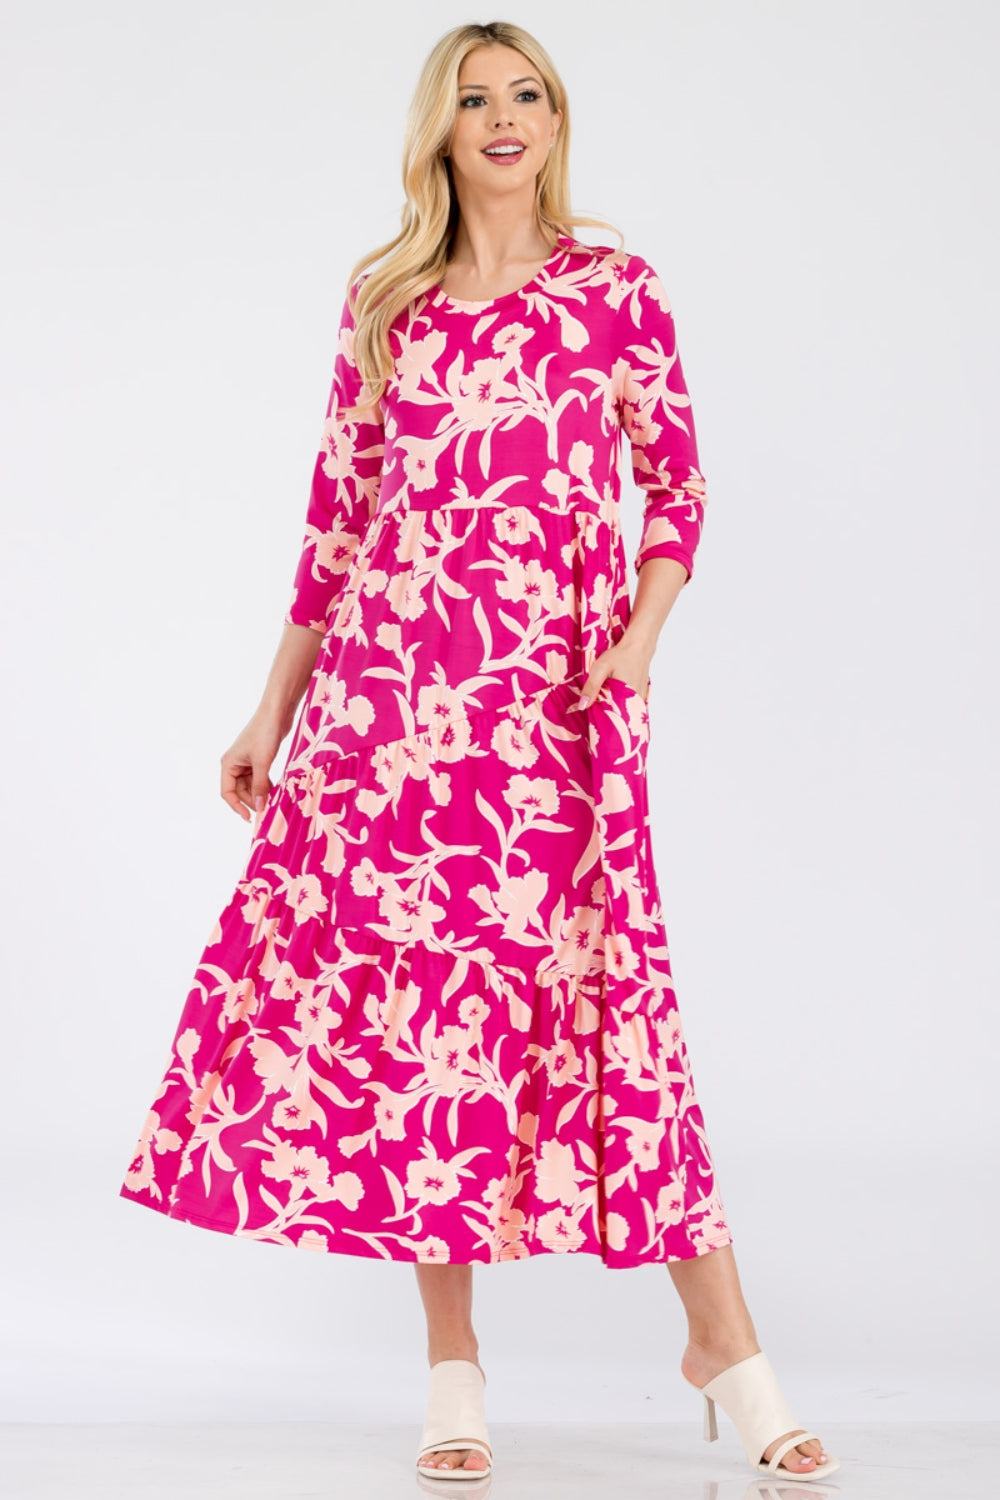 Floral Ruffle Hem Dress: Perfect Attire for Summer Beach Weddings and Party Guests